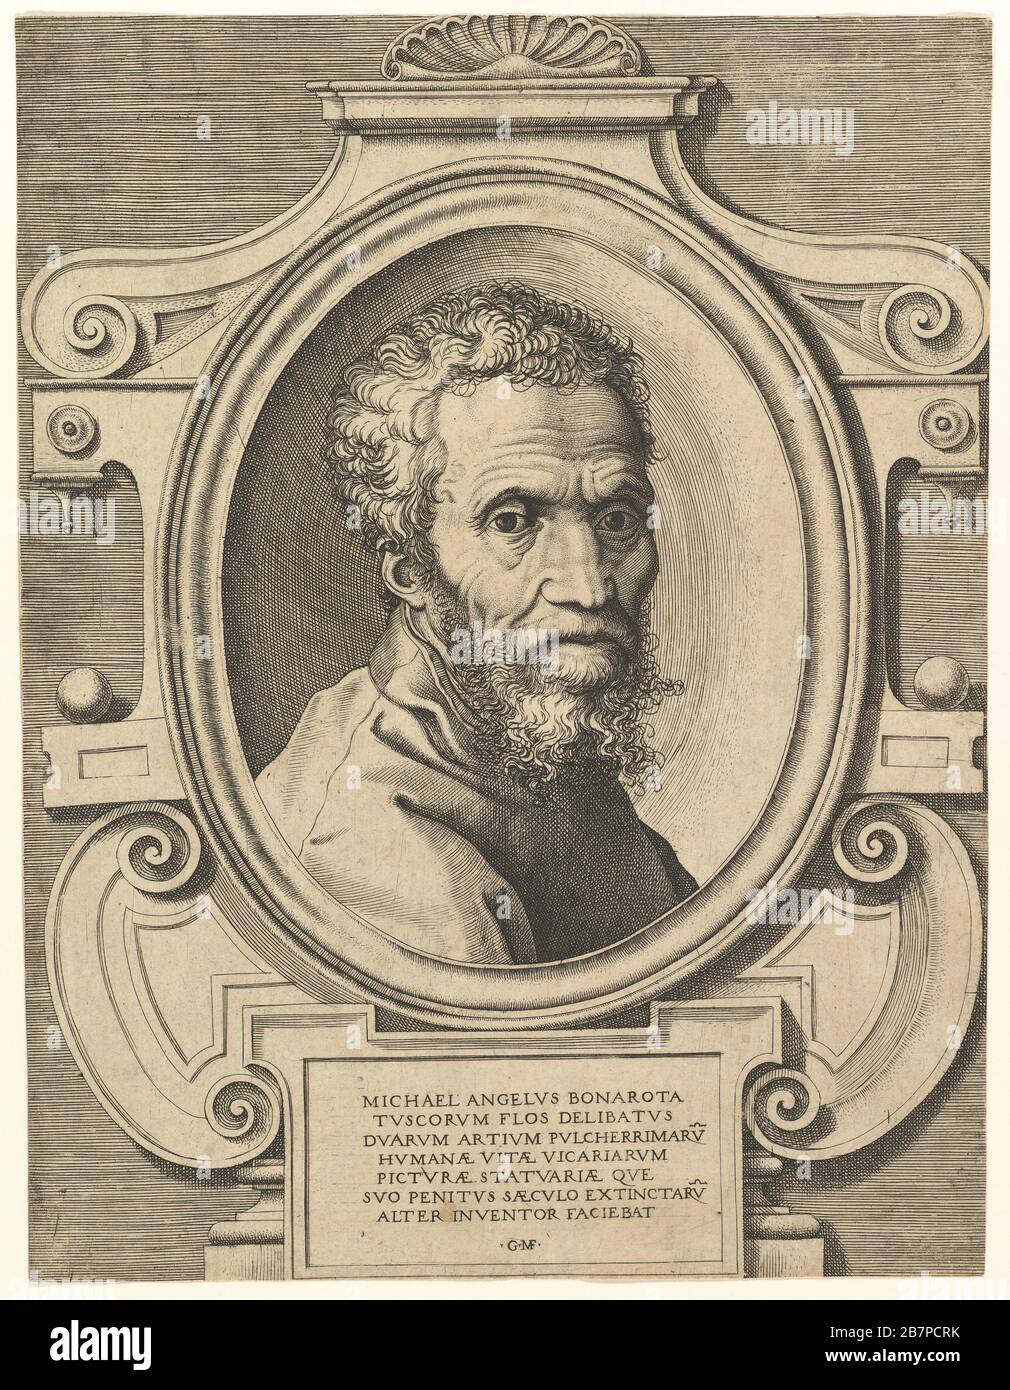 Portrait of Michelangelo, after 1564. After painting by Marcello Venusti Stock Photo